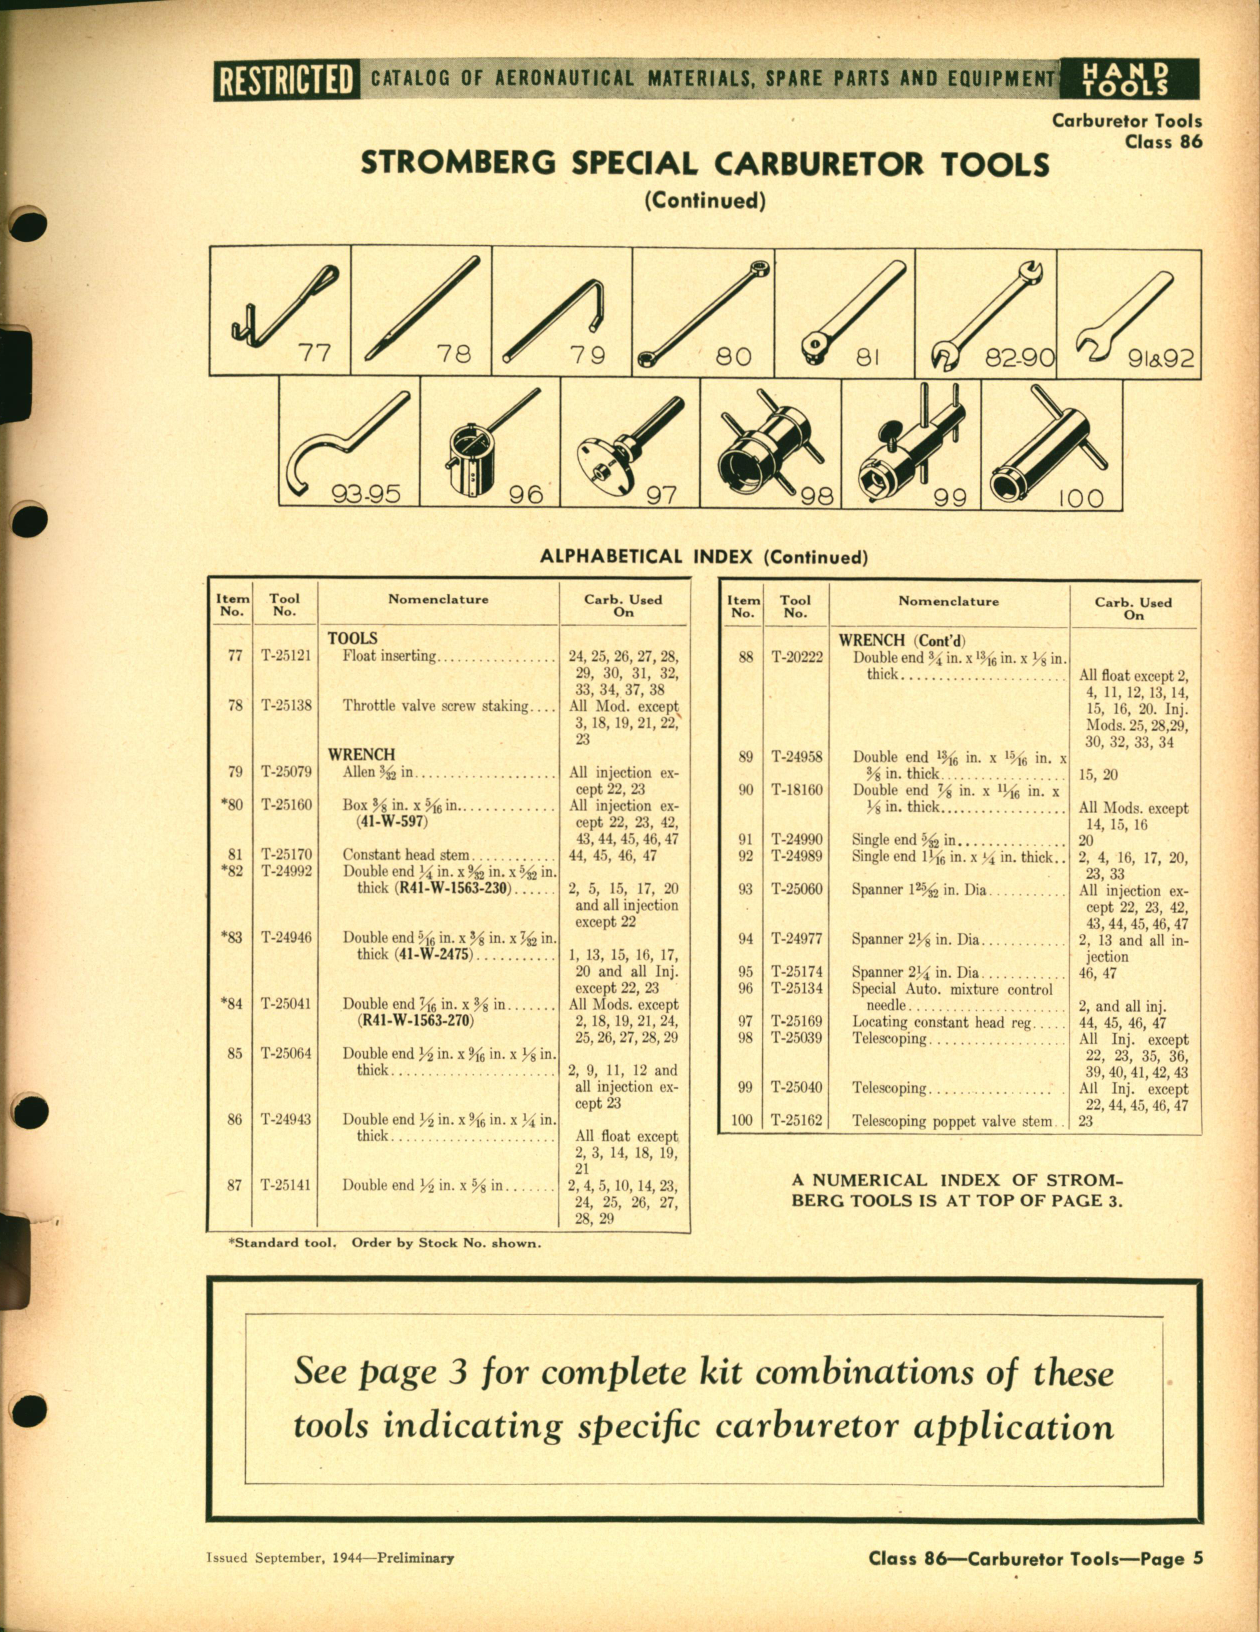 Sample page 5 from AirCorps Library document: Carburetor and Spark Plug Tools